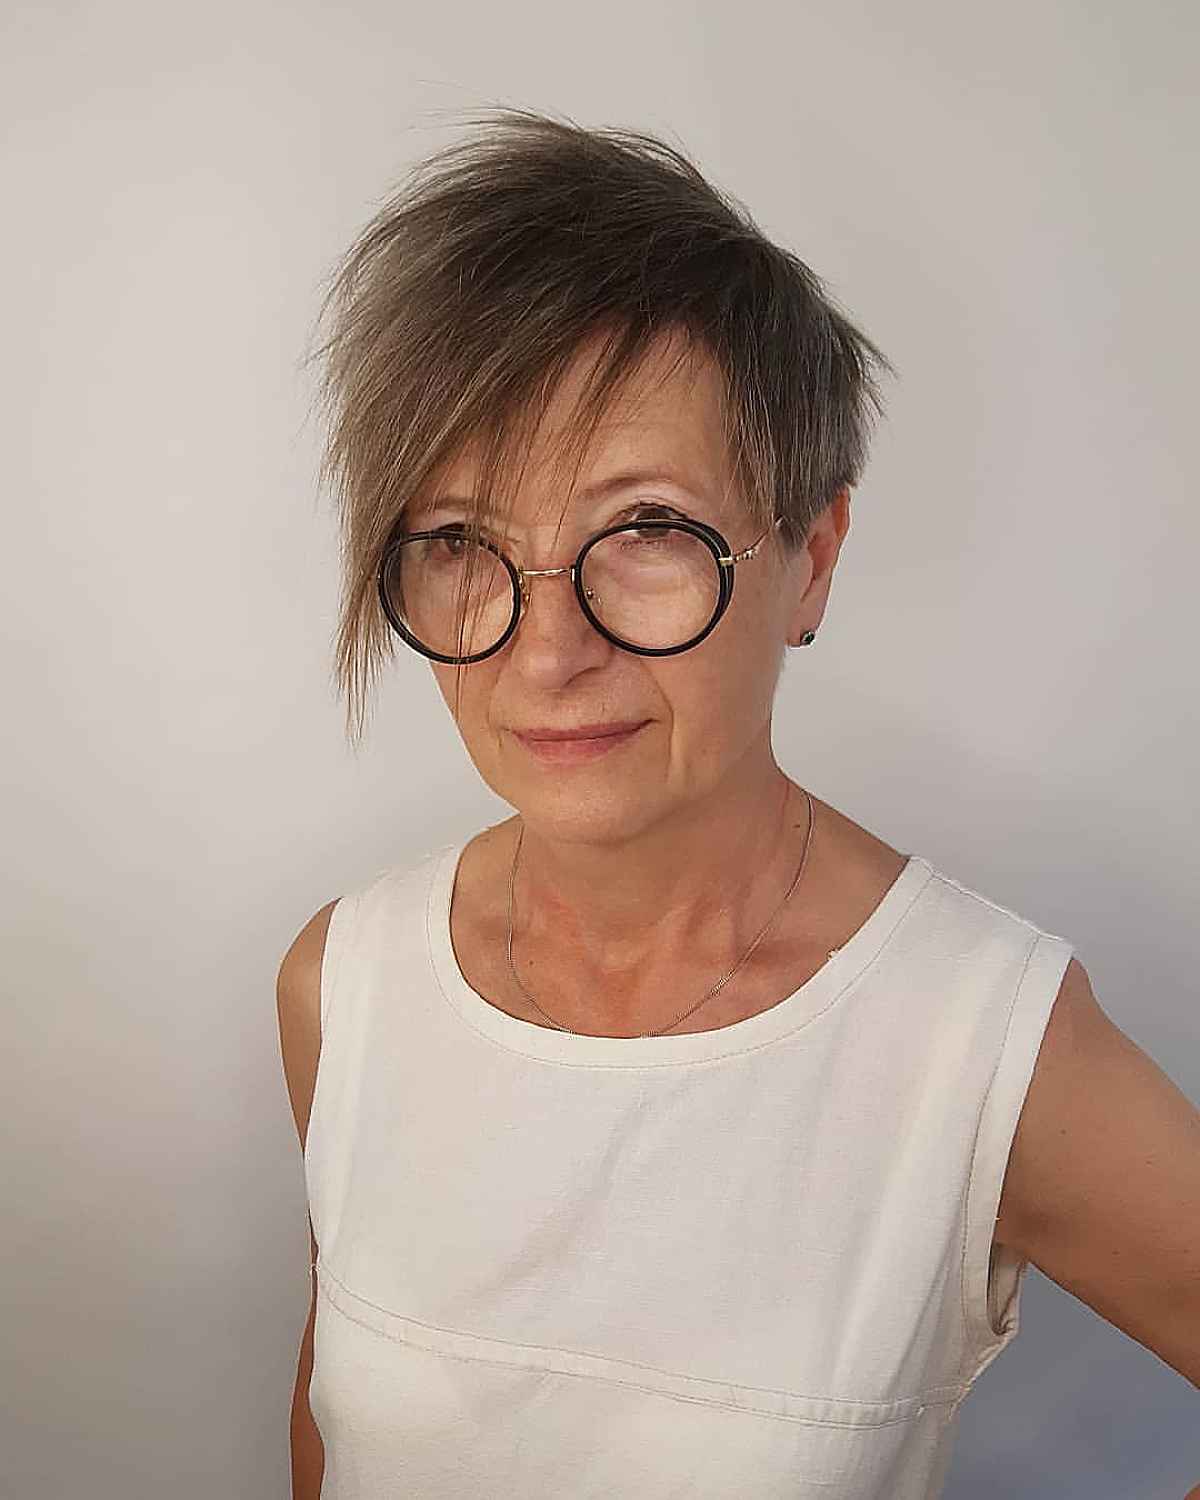 Asymmetrical Pixie Cut for Ladies over 70